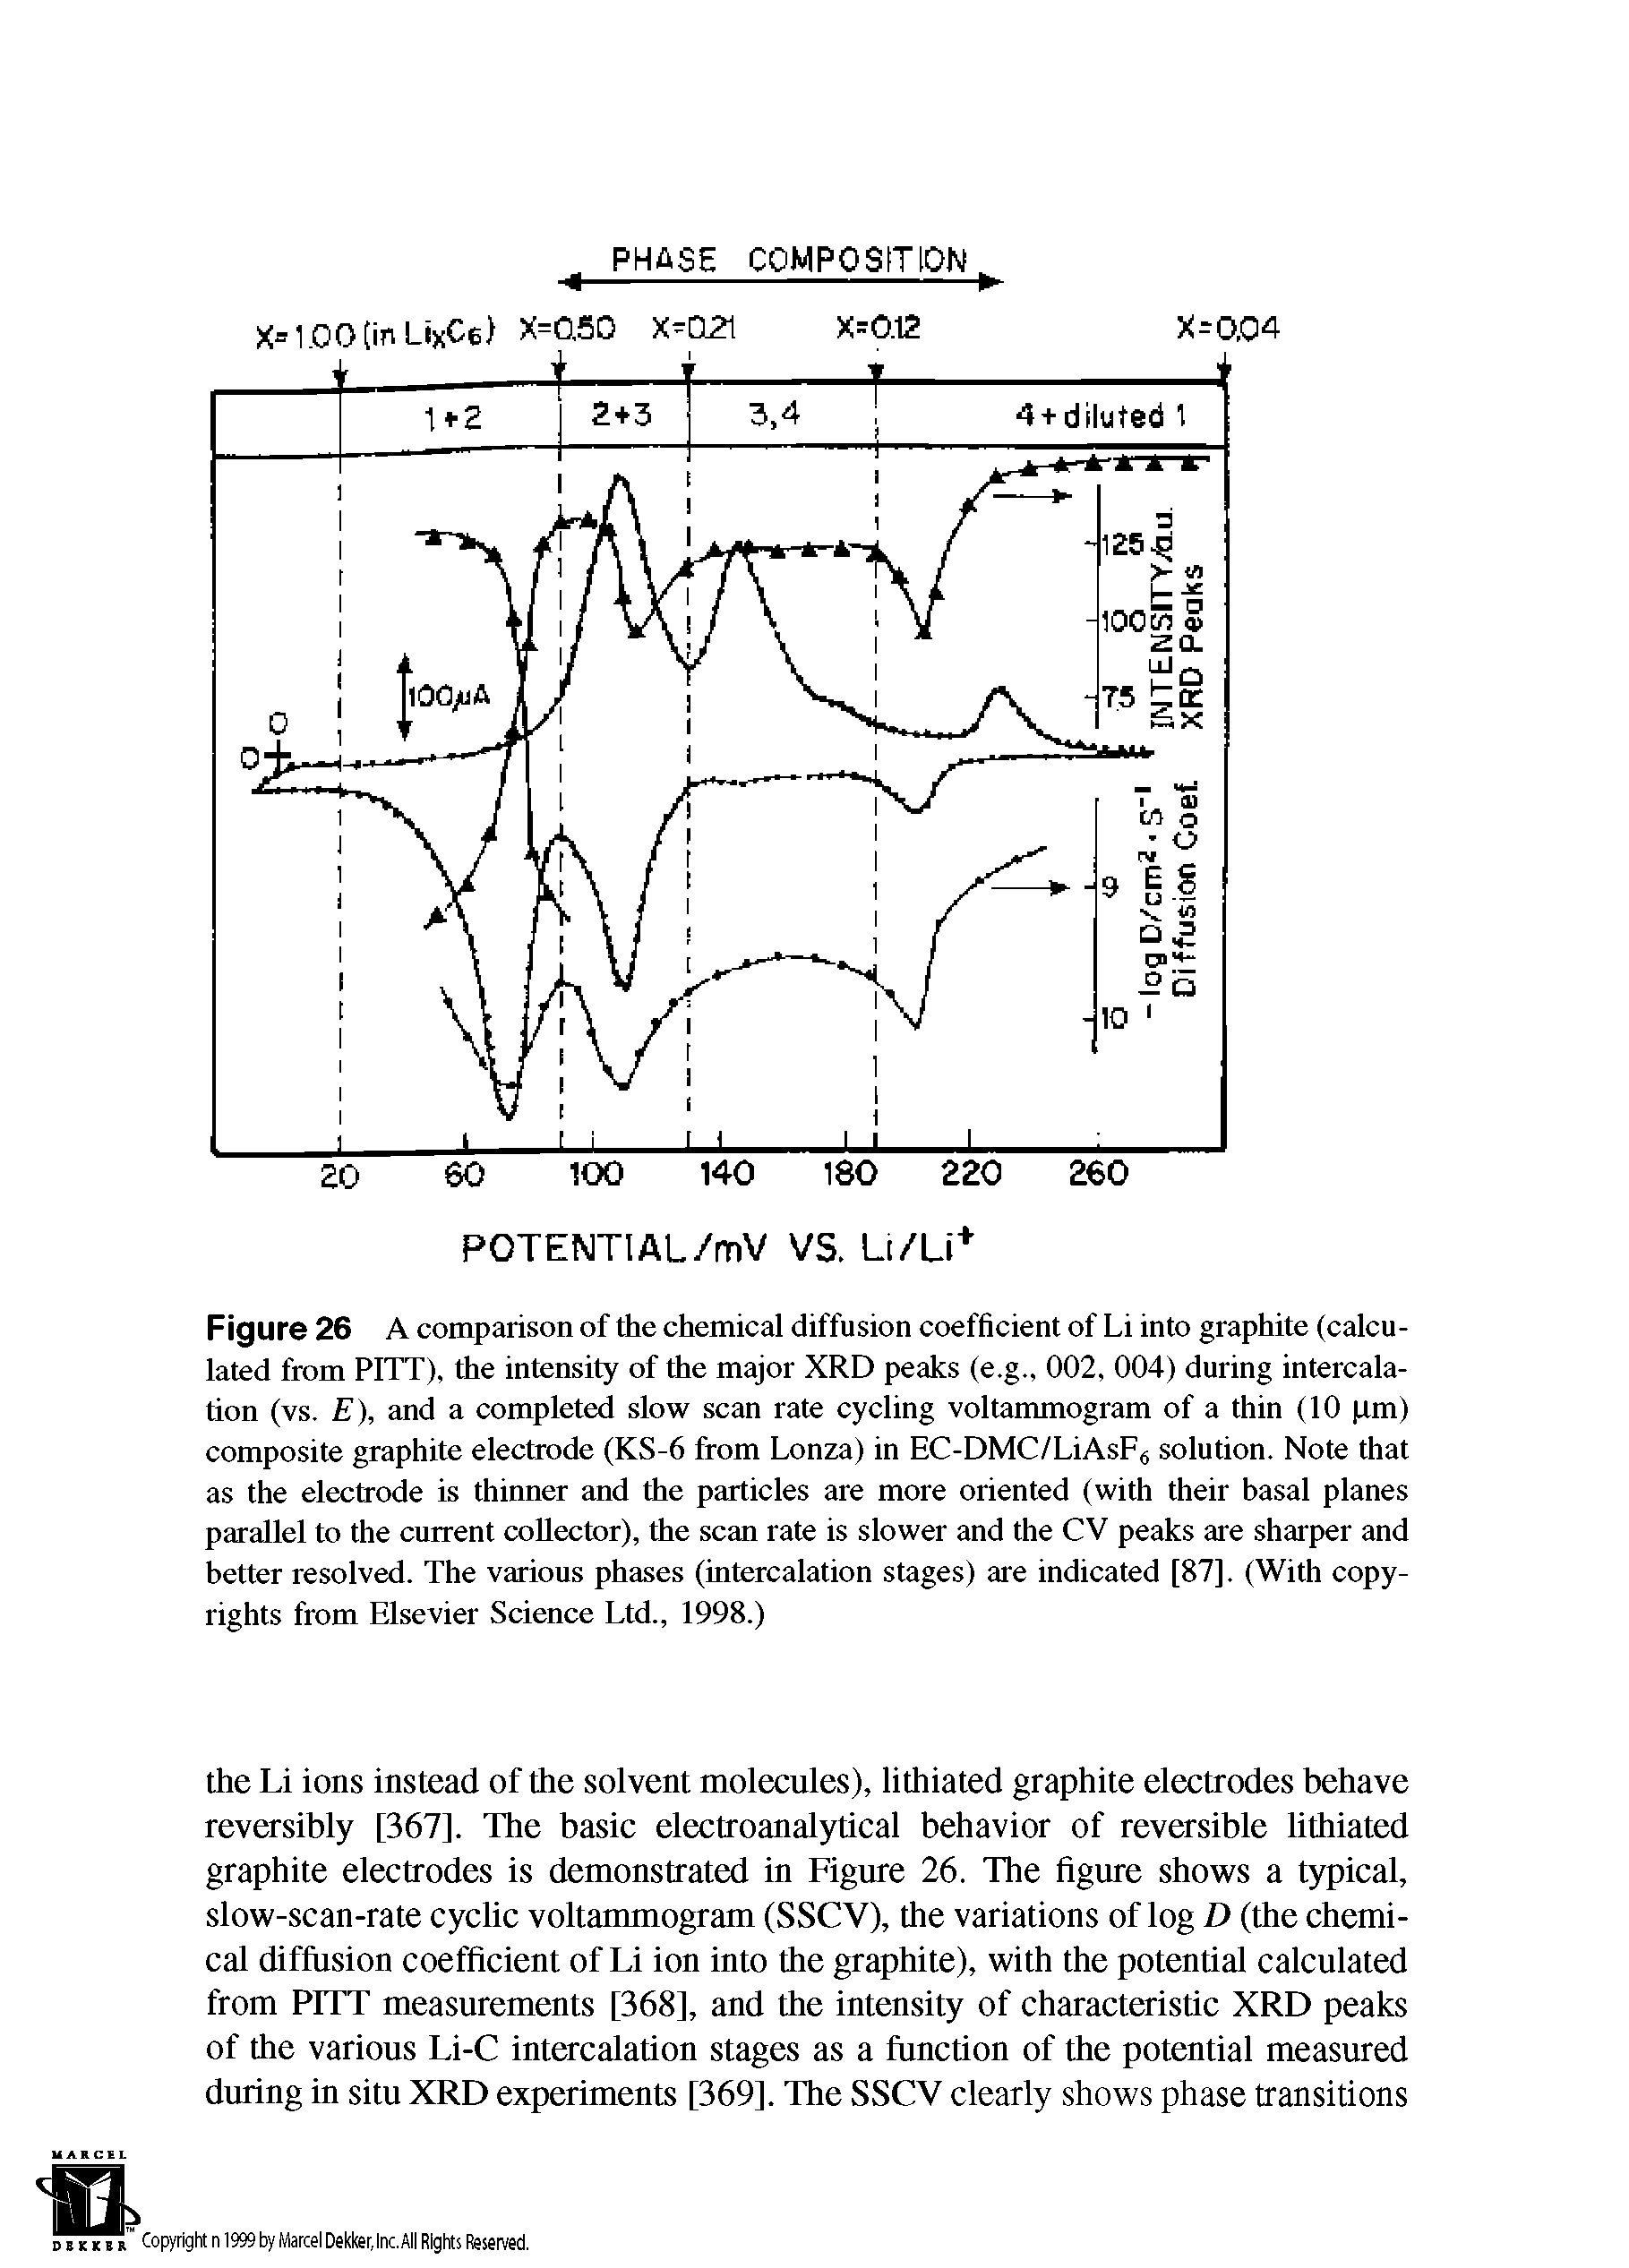 Figure 26 A comparison of the chemical diffusion coefficient of Li into graphite (calculated from PITT), the intensity of the major XRD peaks (e.g., 002, 004) during intercalation (vs. E), and a completed slow scan rate cycling voltammogram of a thin (10 pm) composite graphite electrode (KS-6 from Lonza) in EC-DMC/LiAsF6 solution. Note that as the electrode is thinner and the particles are more oriented (with their basal planes parallel to the current collector), the scan rate is slower and the CV peaks are sharper and better resolved. The various phases (intercalation stages) are indicated [87]. (With copyrights from Elsevier Science Ltd., 1998.)...